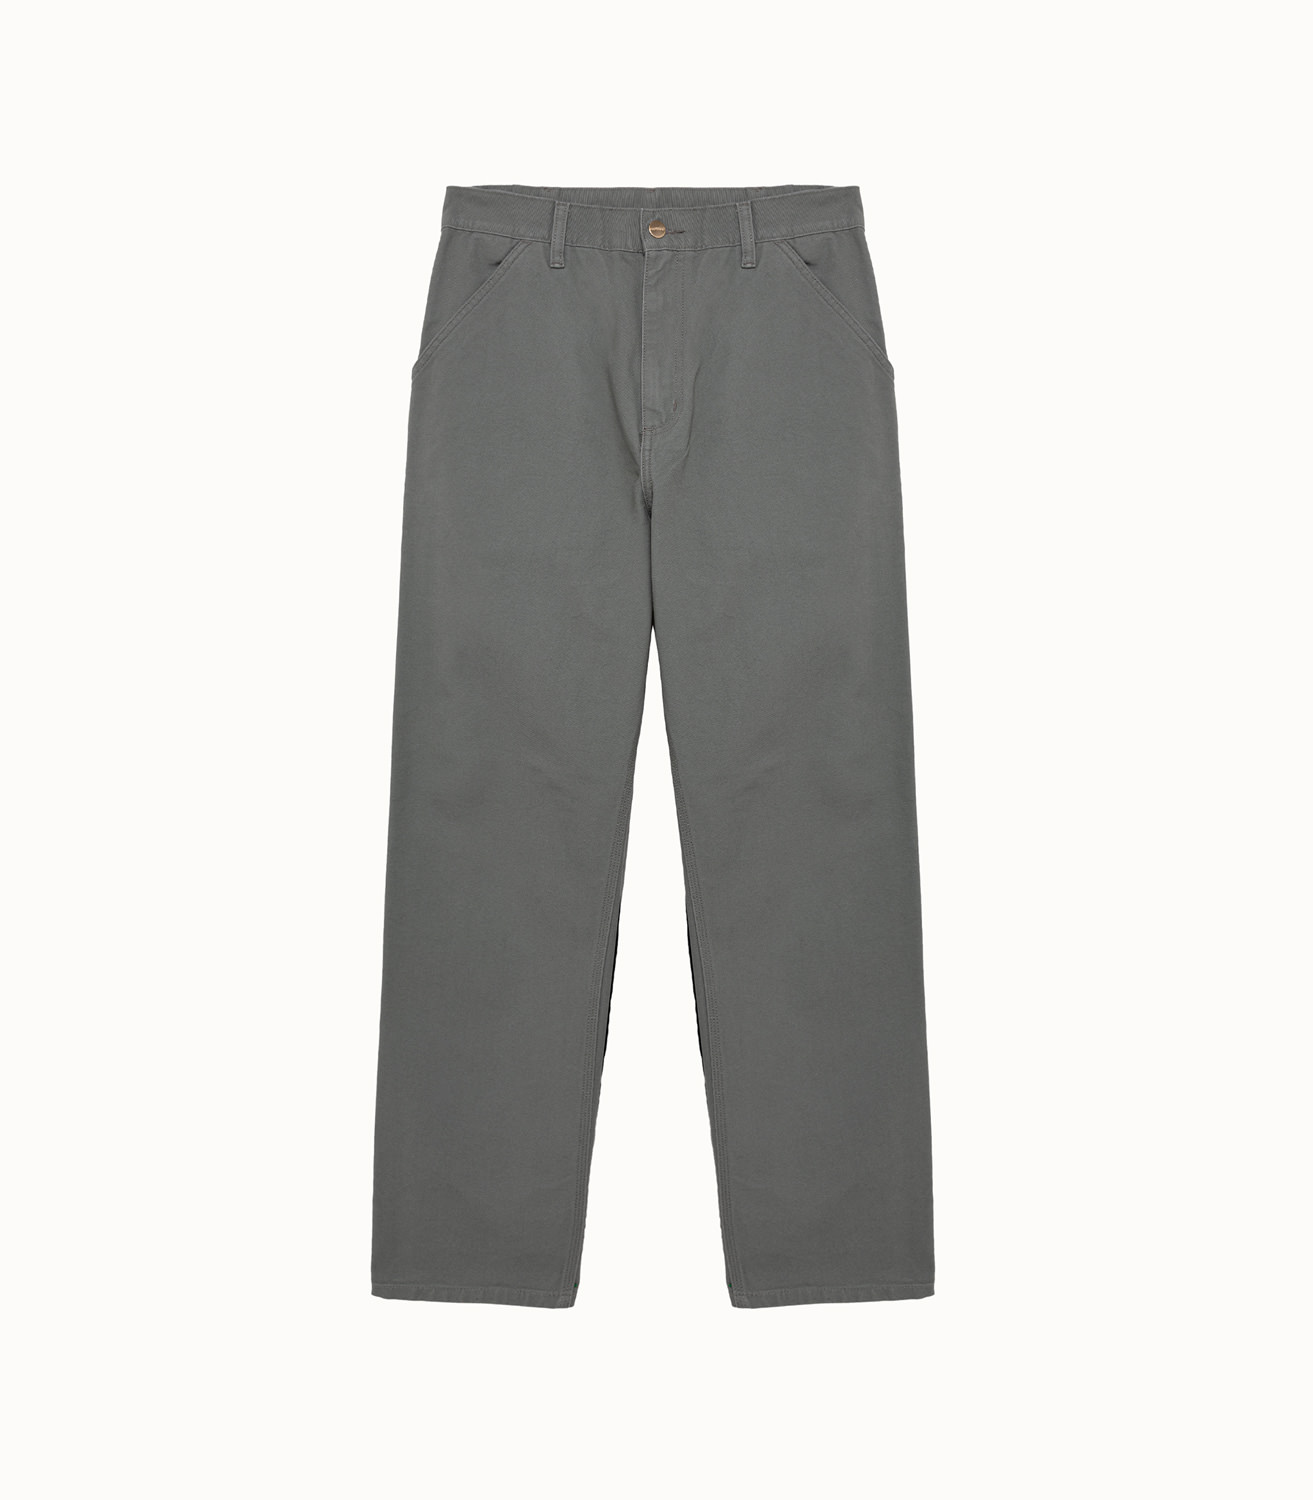 CARHARTT WIP SOLID COLOR ORGANIC PANTS | Playground